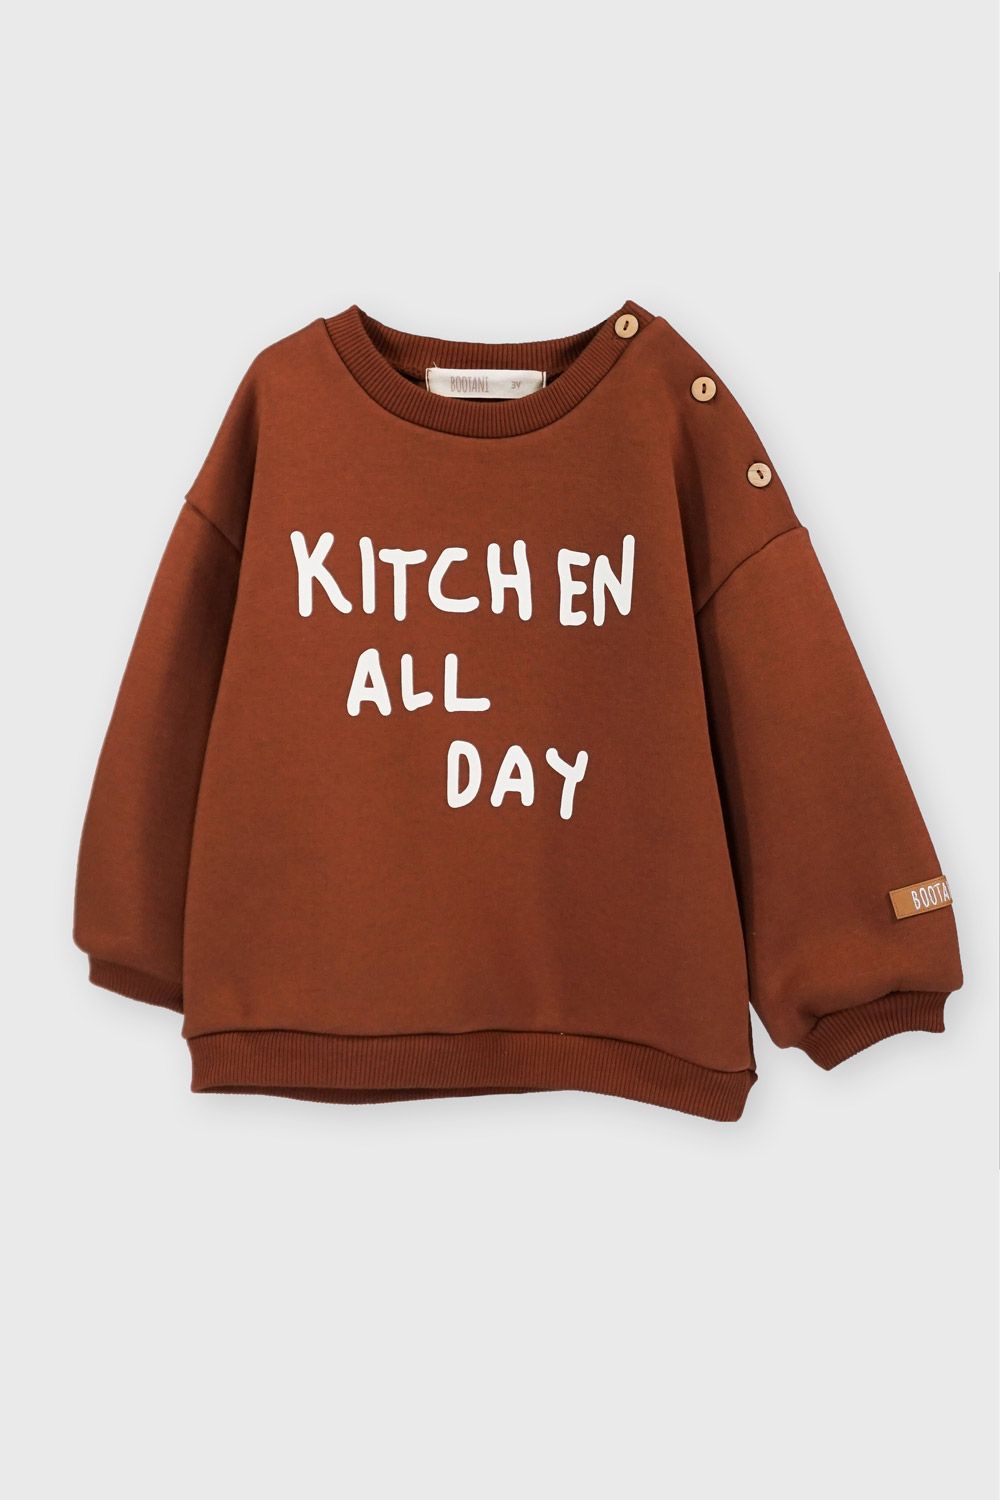 KITCHEN ALL DAY SWEATER